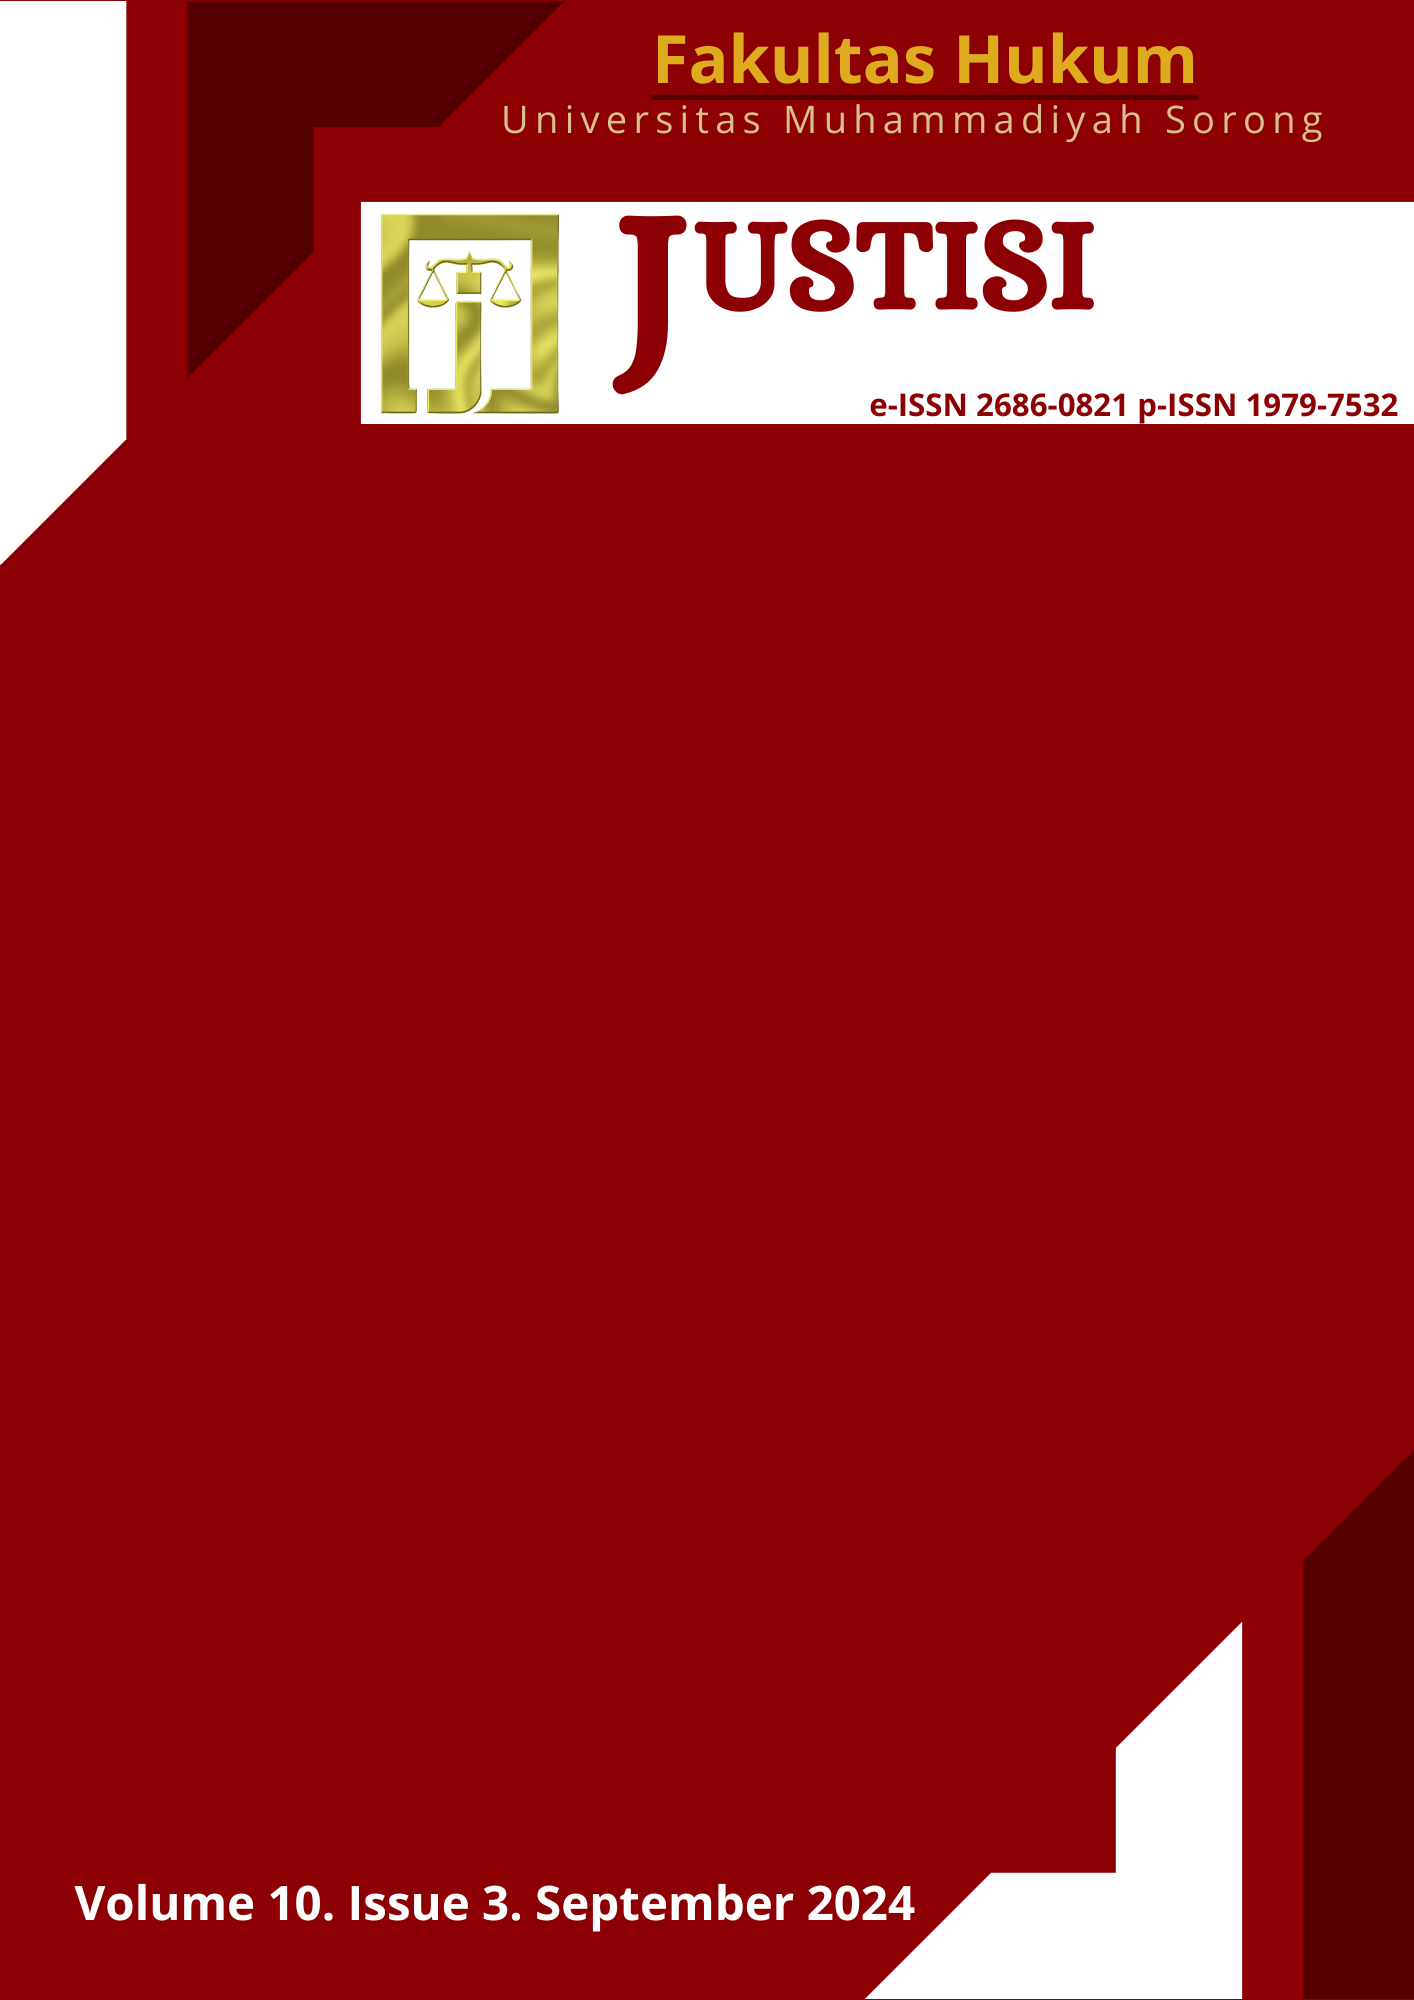 					View Vol. 10 No. 3 (2024): JUSTISI (in press)
				